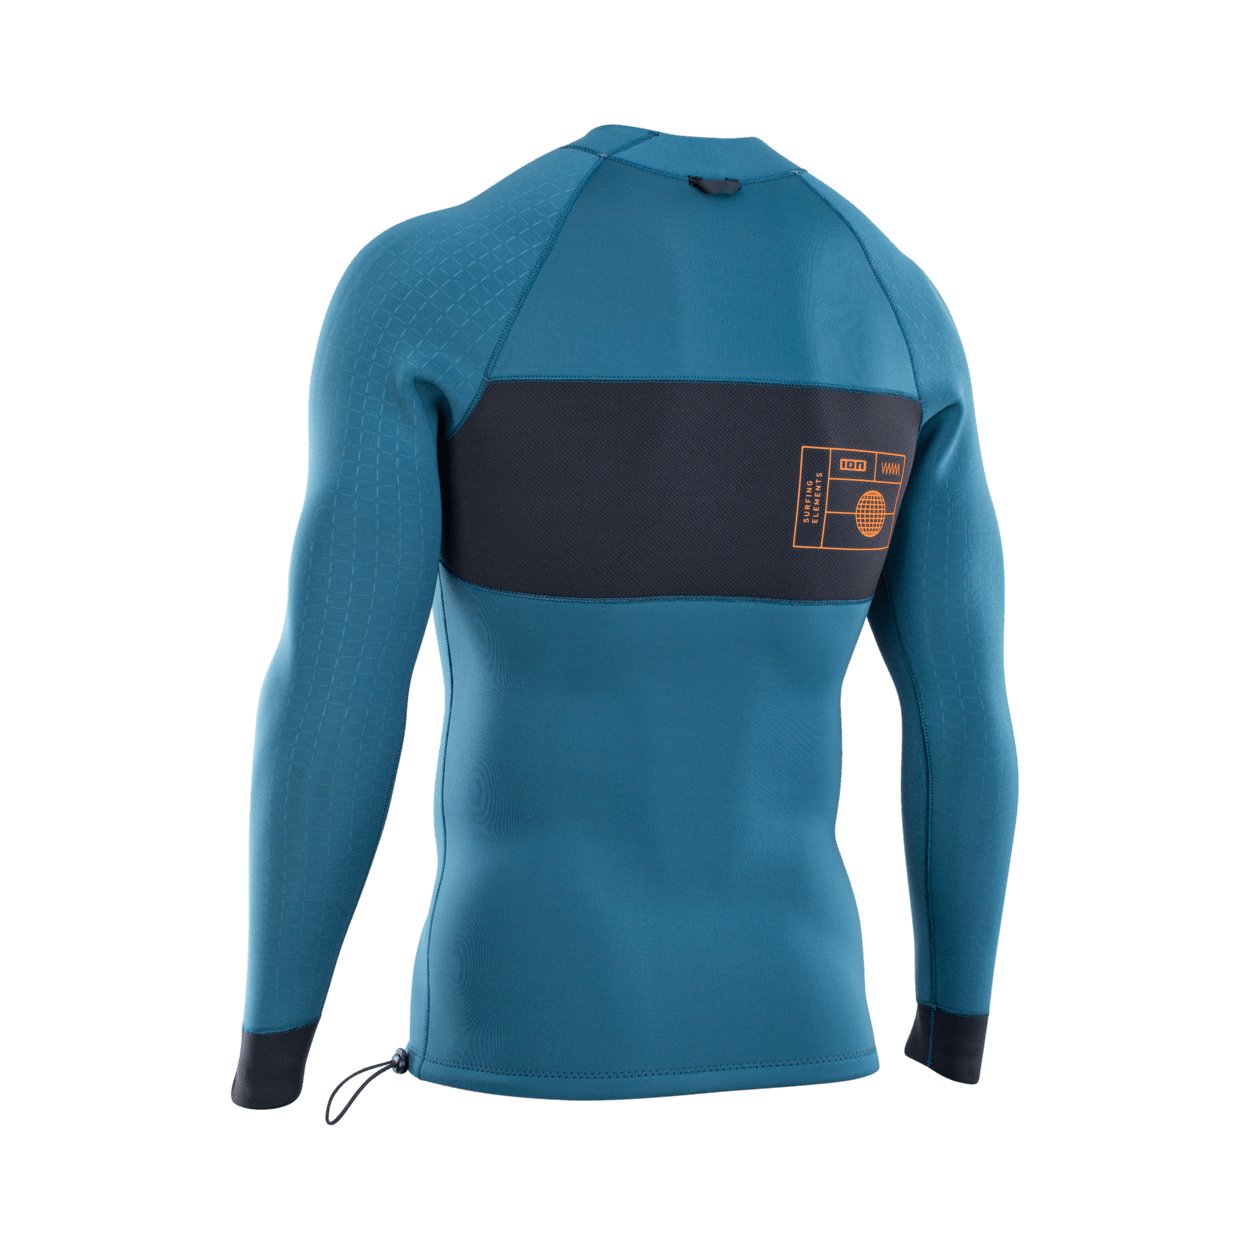 ION Neo Top 2/2 LS men 2022 - Worthing Watersports - 9010583058603 - Tops - ION Water